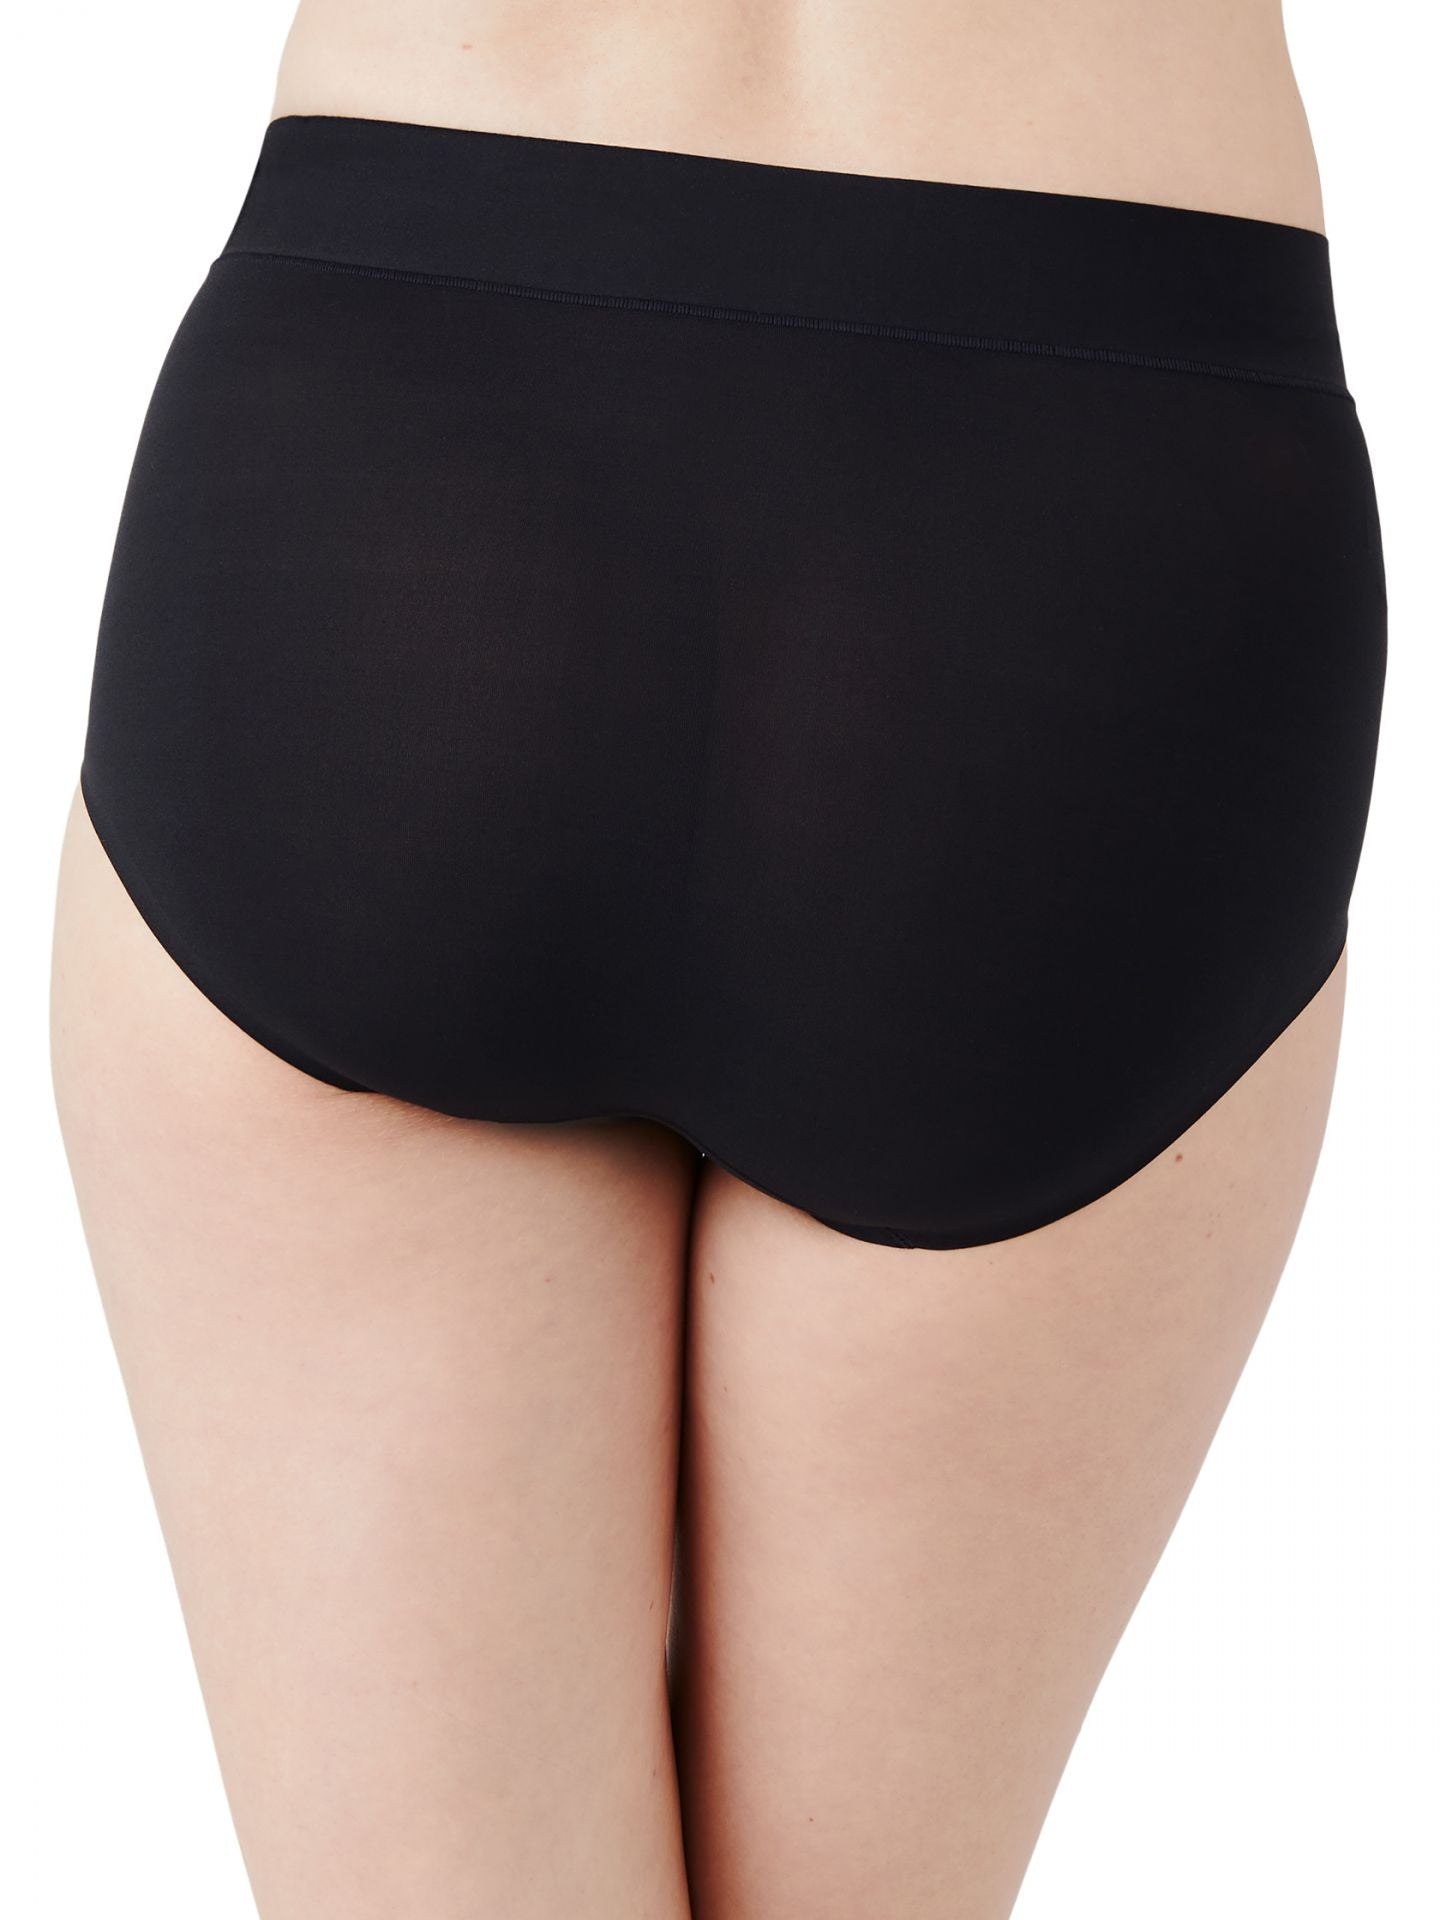 Women's At Ease Brief